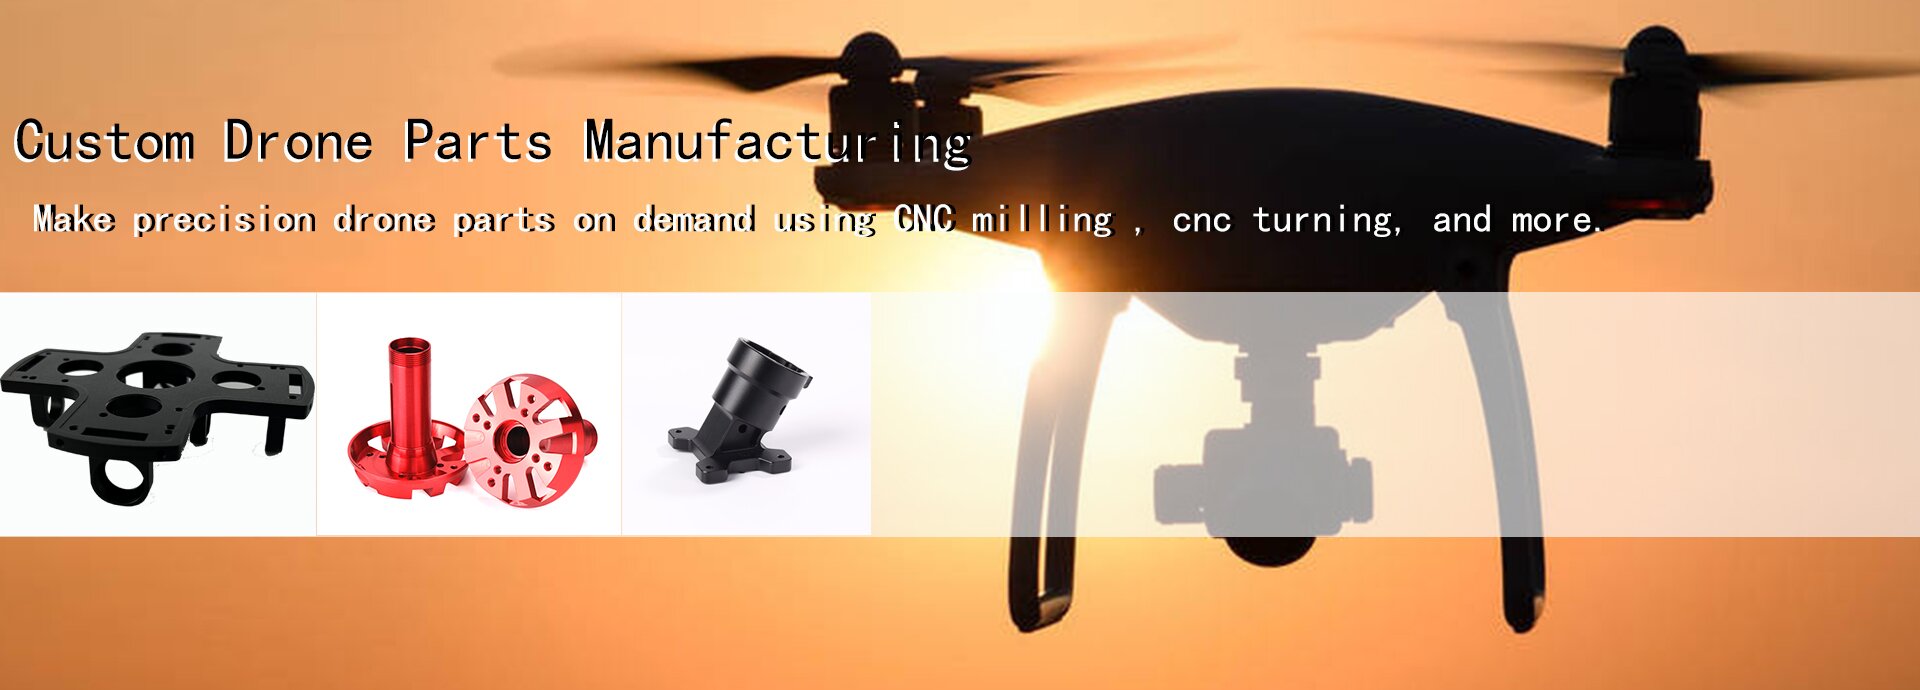 Speed Up Drone Product Development & Production With Manufacturing on Demand